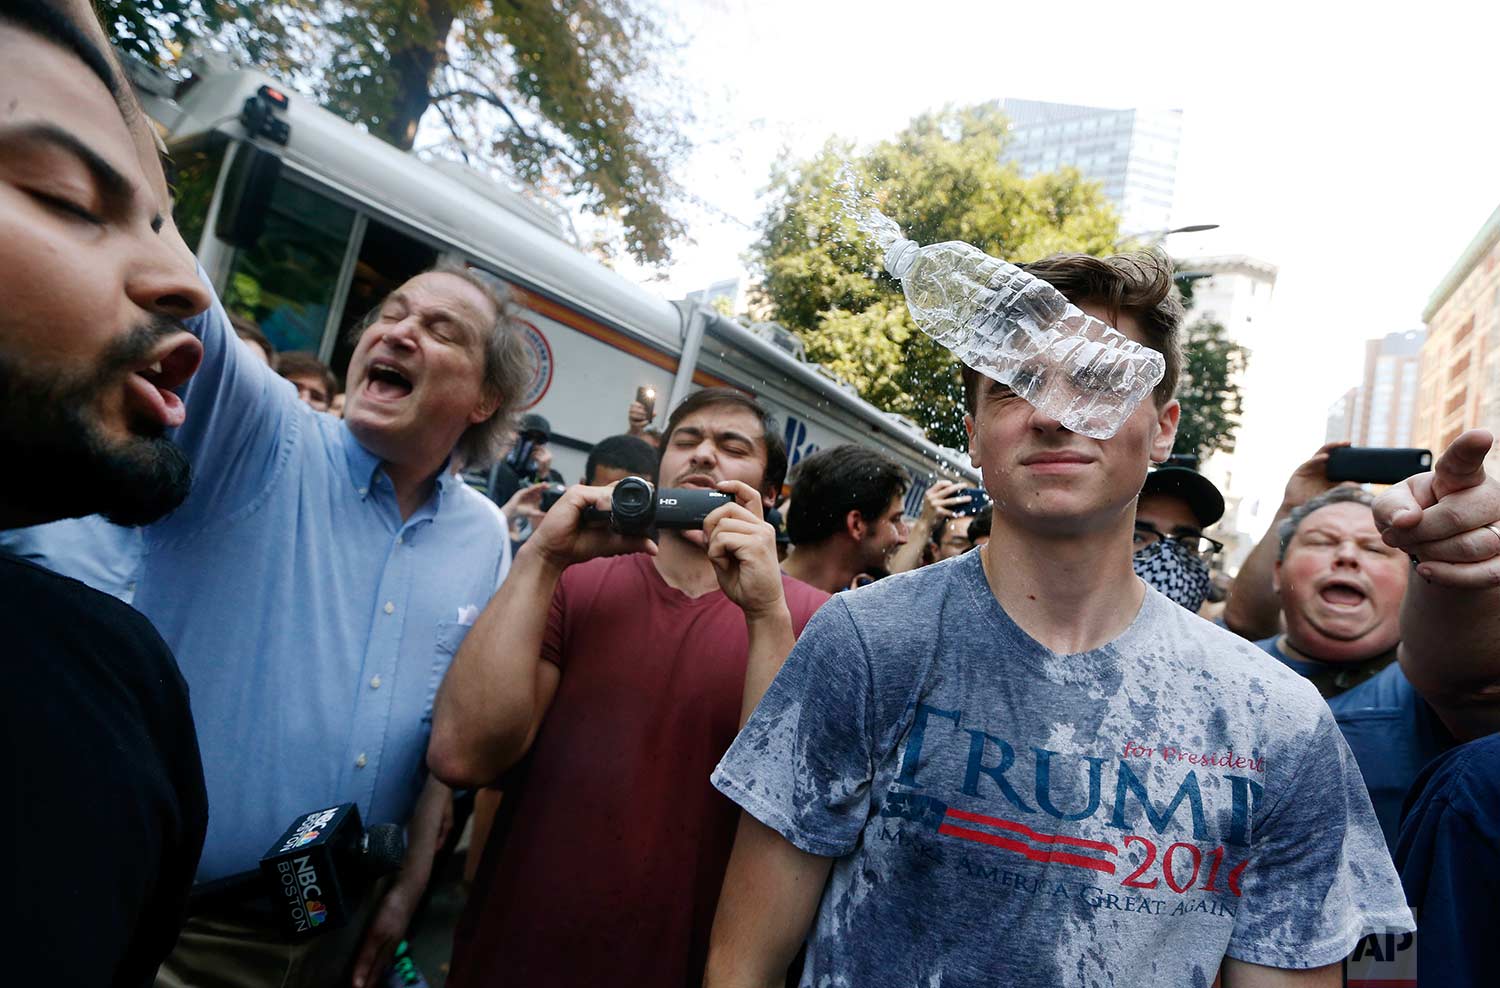  A man wearing a T-shirt bearing the name of President Donald Trump, right, is hit by a flying plastic bottle of water near a "Free Speech" rally staged by conservative activists, Saturday, Aug. 19, 2017, in Boston. Counterprotesters marched through 